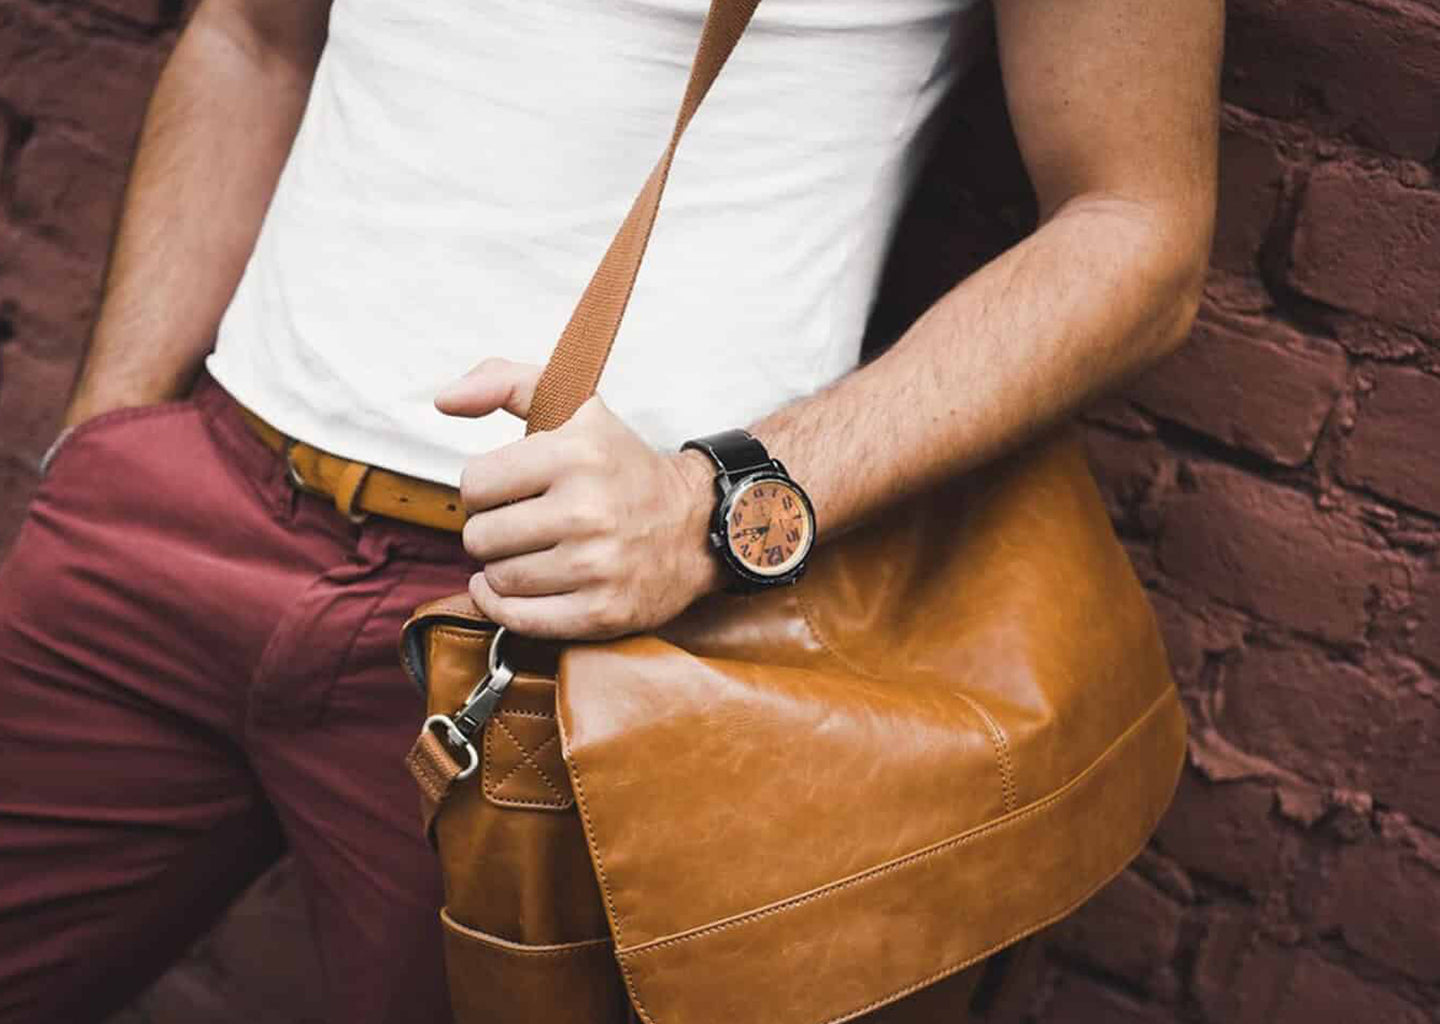 Pick your best Christmas Gift - Leather bags!